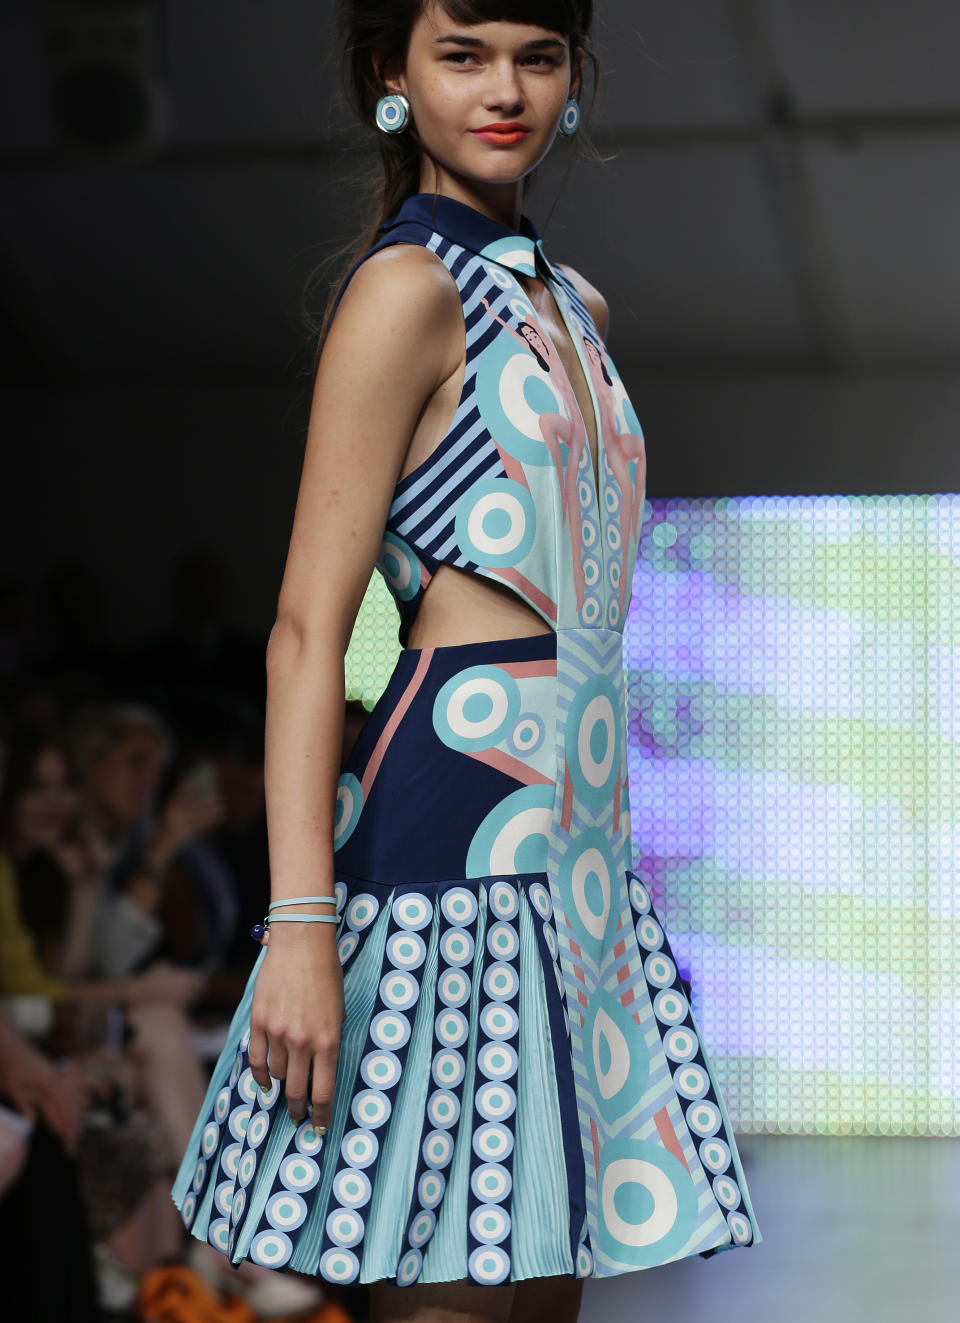 A model presents a creation by Holly Fulton during her Spring/Summer 2013 show at London Fashion Week in London, Saturday, Sept. 15, 2012. (AP Photo/Alastair Grant)